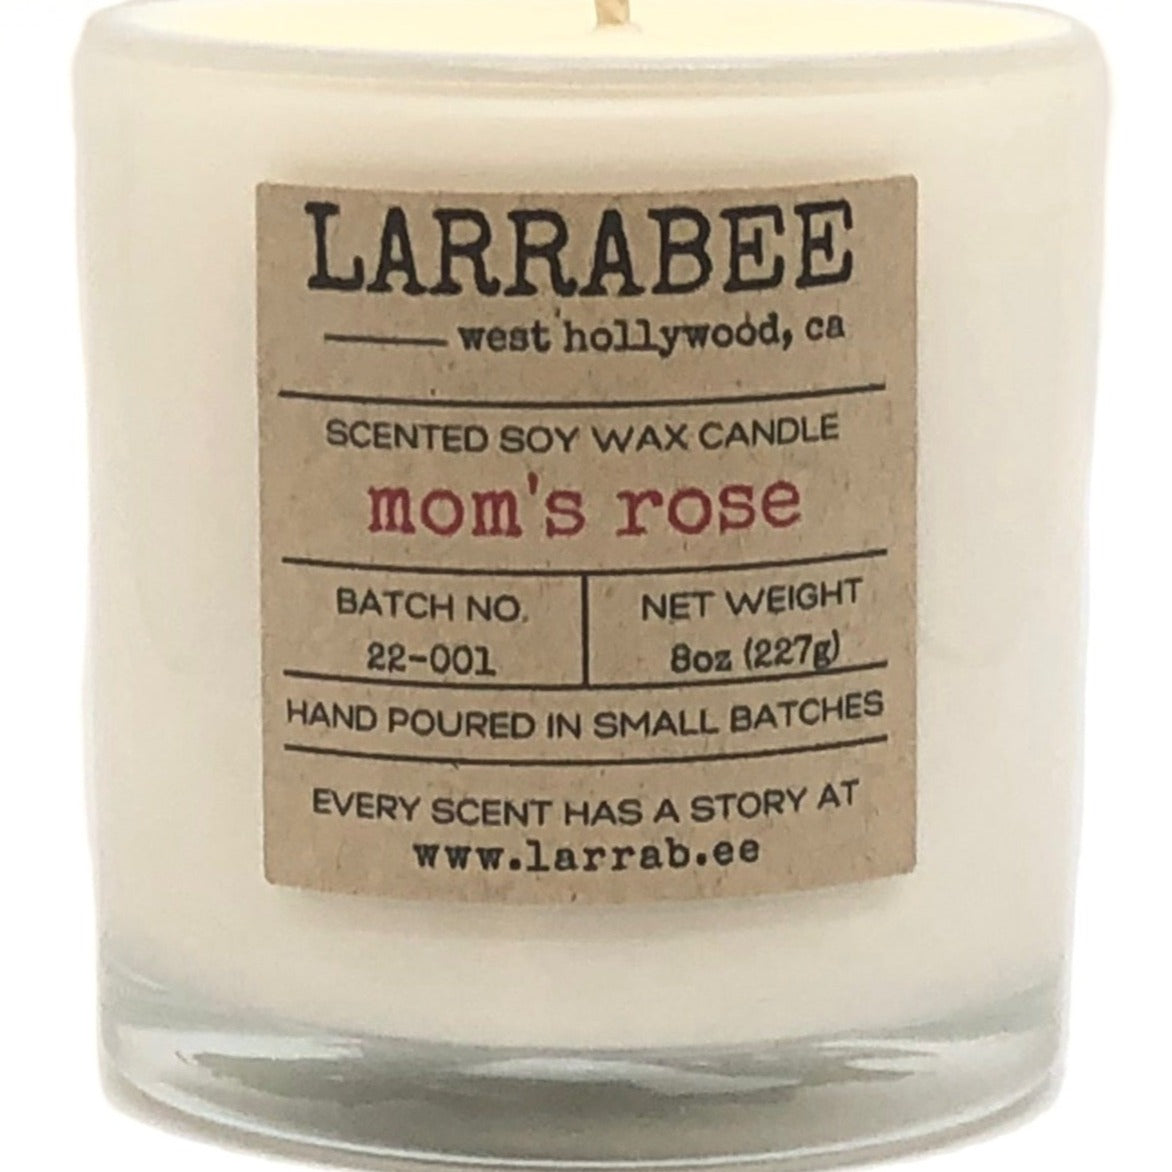 Mom's Rose handcrafted candle